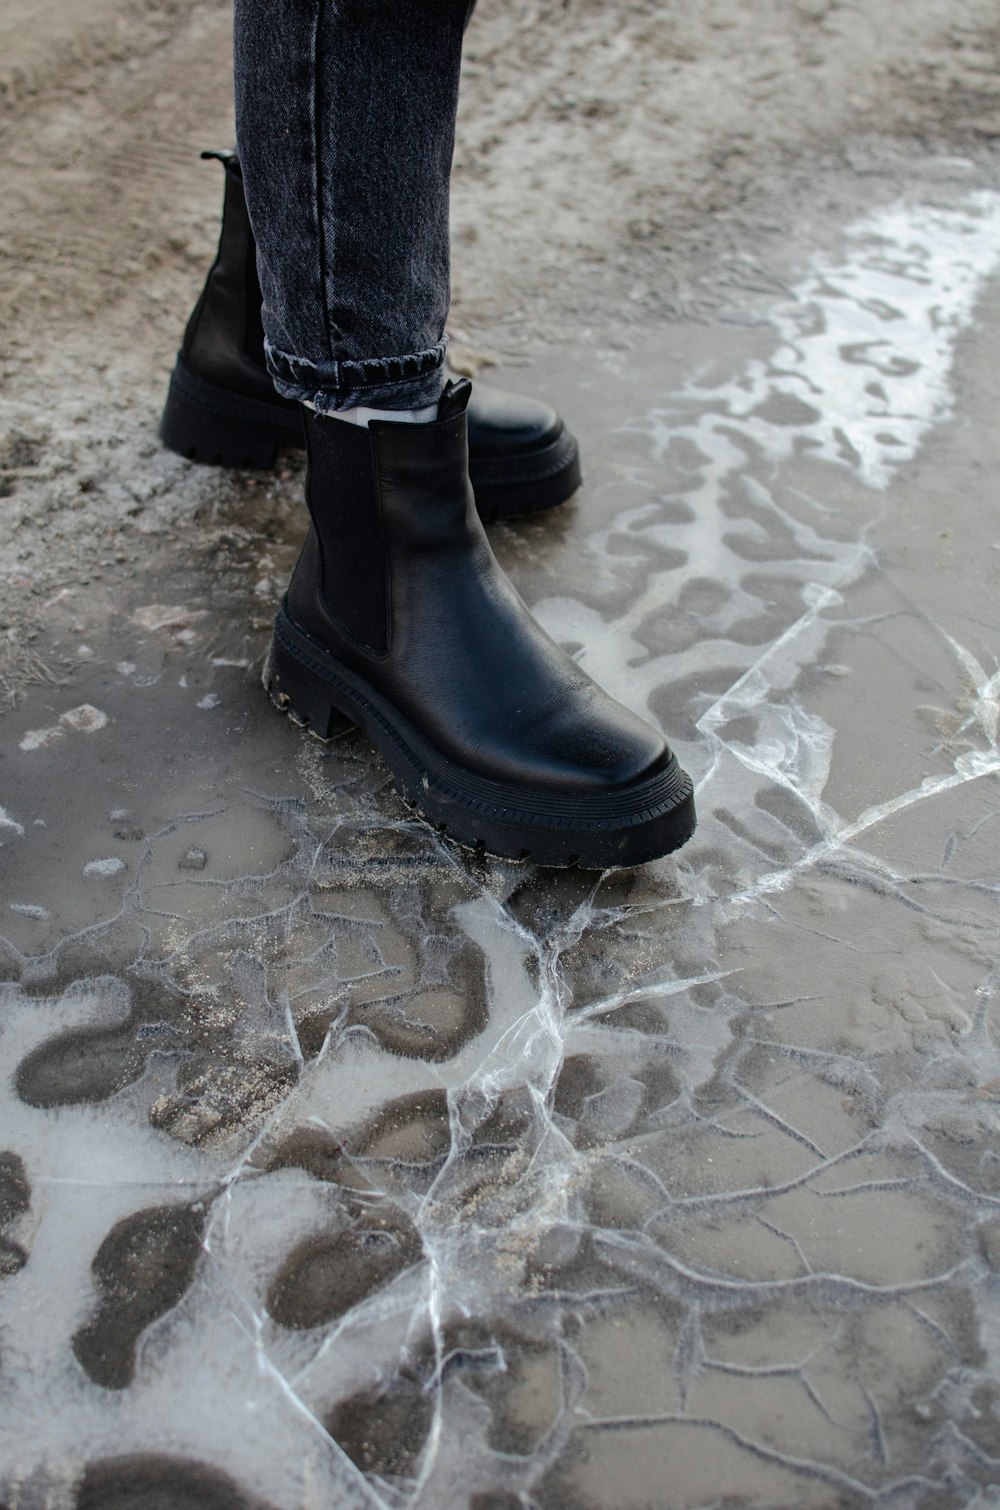 a person in black boots standing in a puddle of water